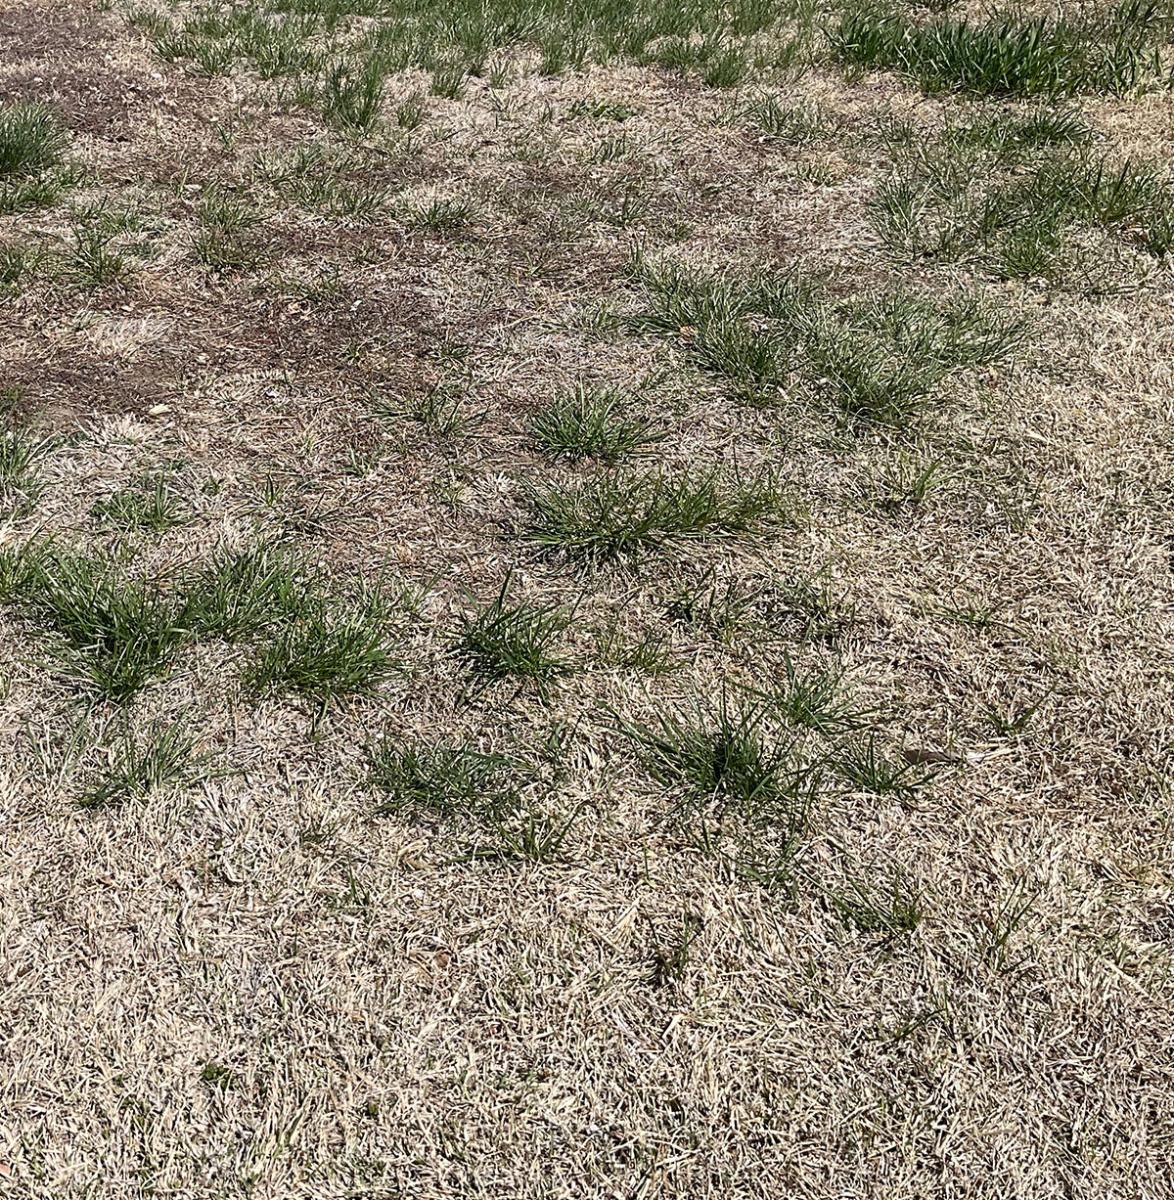 Picture of severe drought damage in turf.